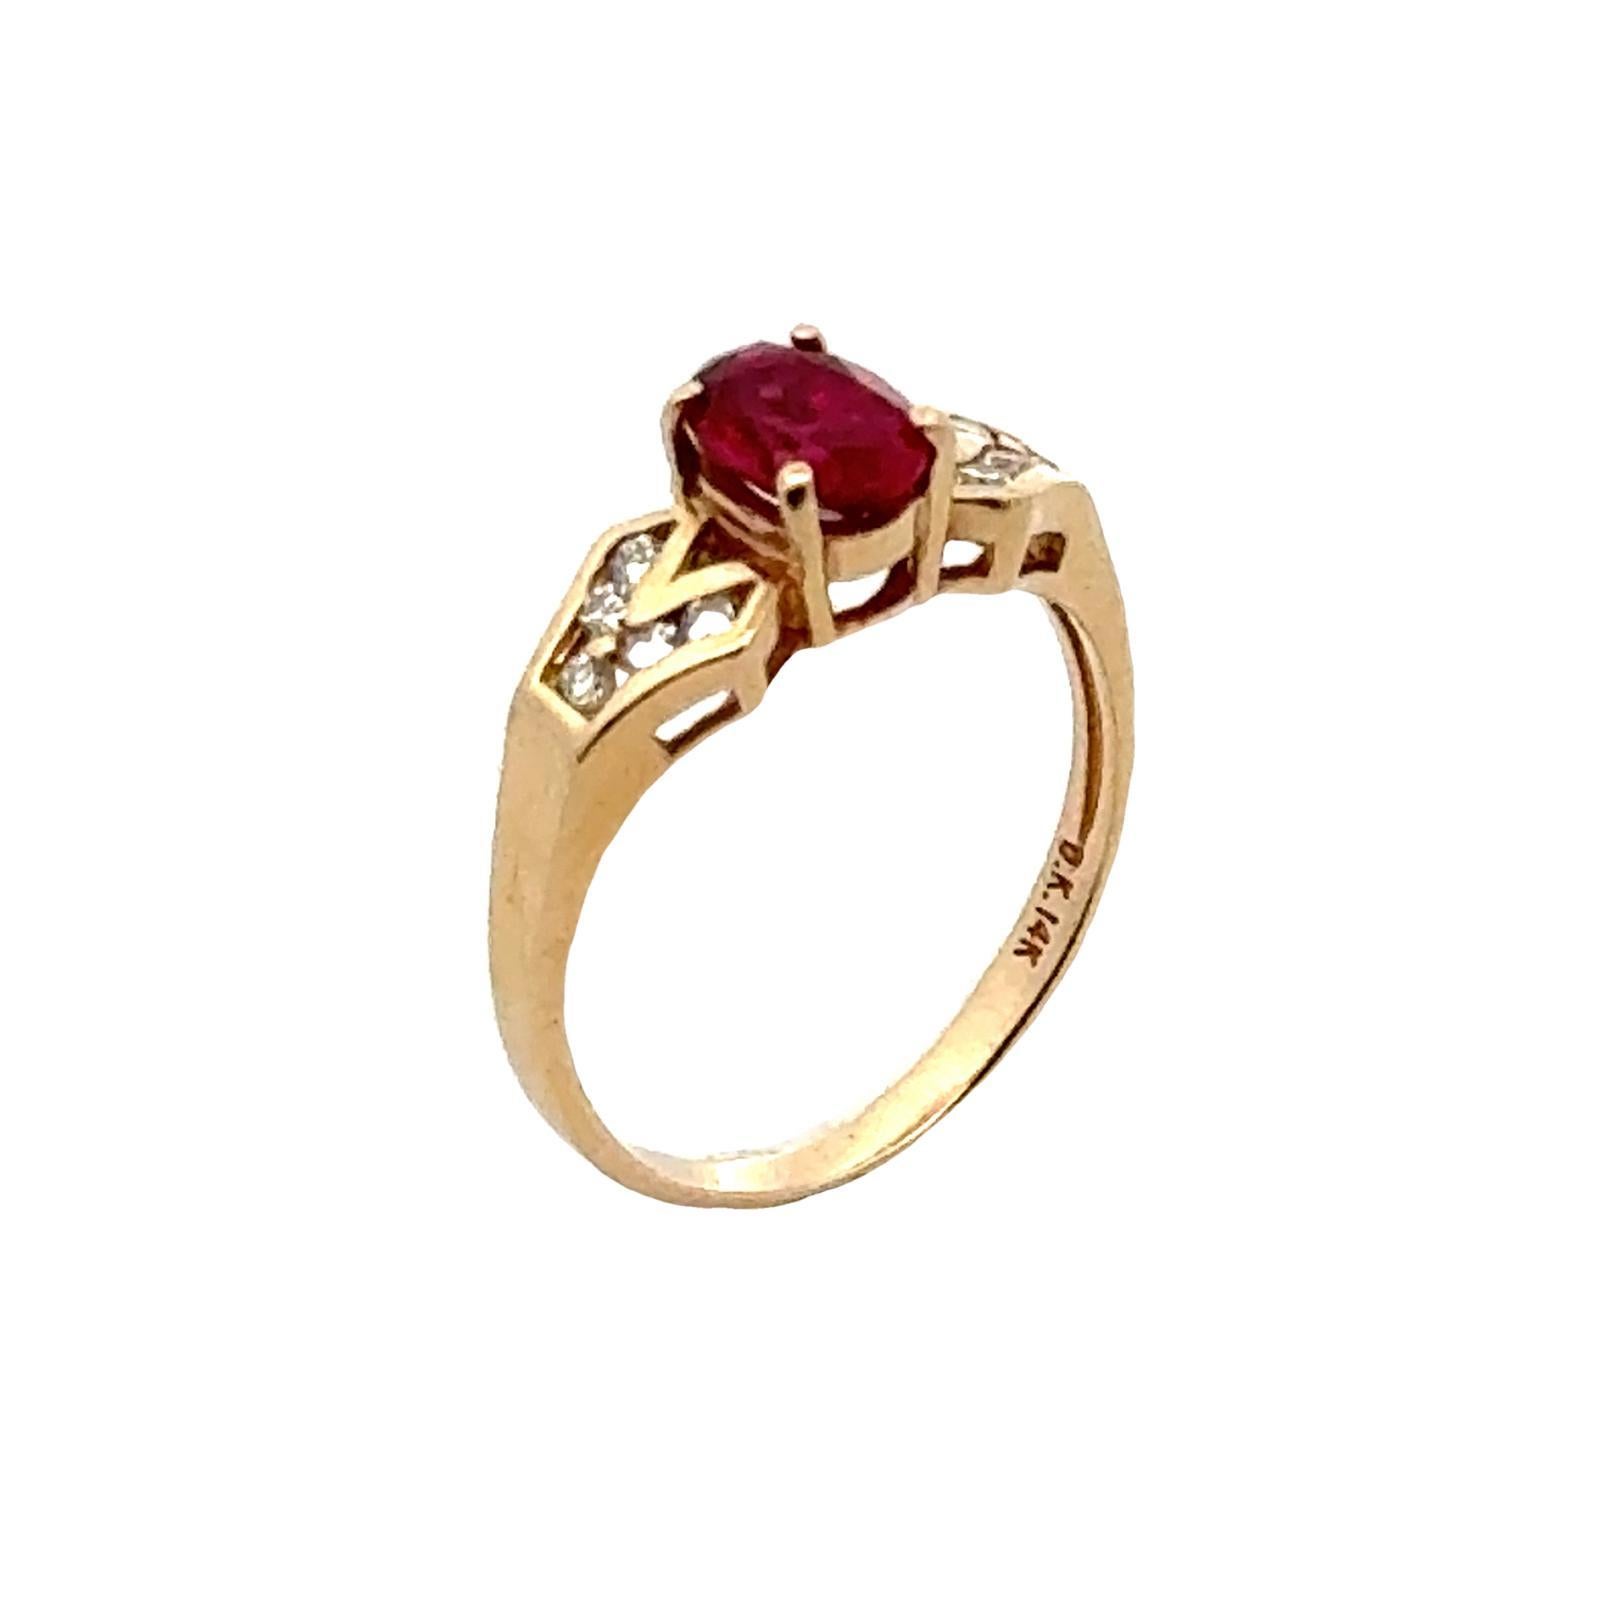 Oval Ruby Diamond 14 Karat Yellow Gold Vintage Cocktail Ring In Excellent Condition For Sale In Boca Raton, FL